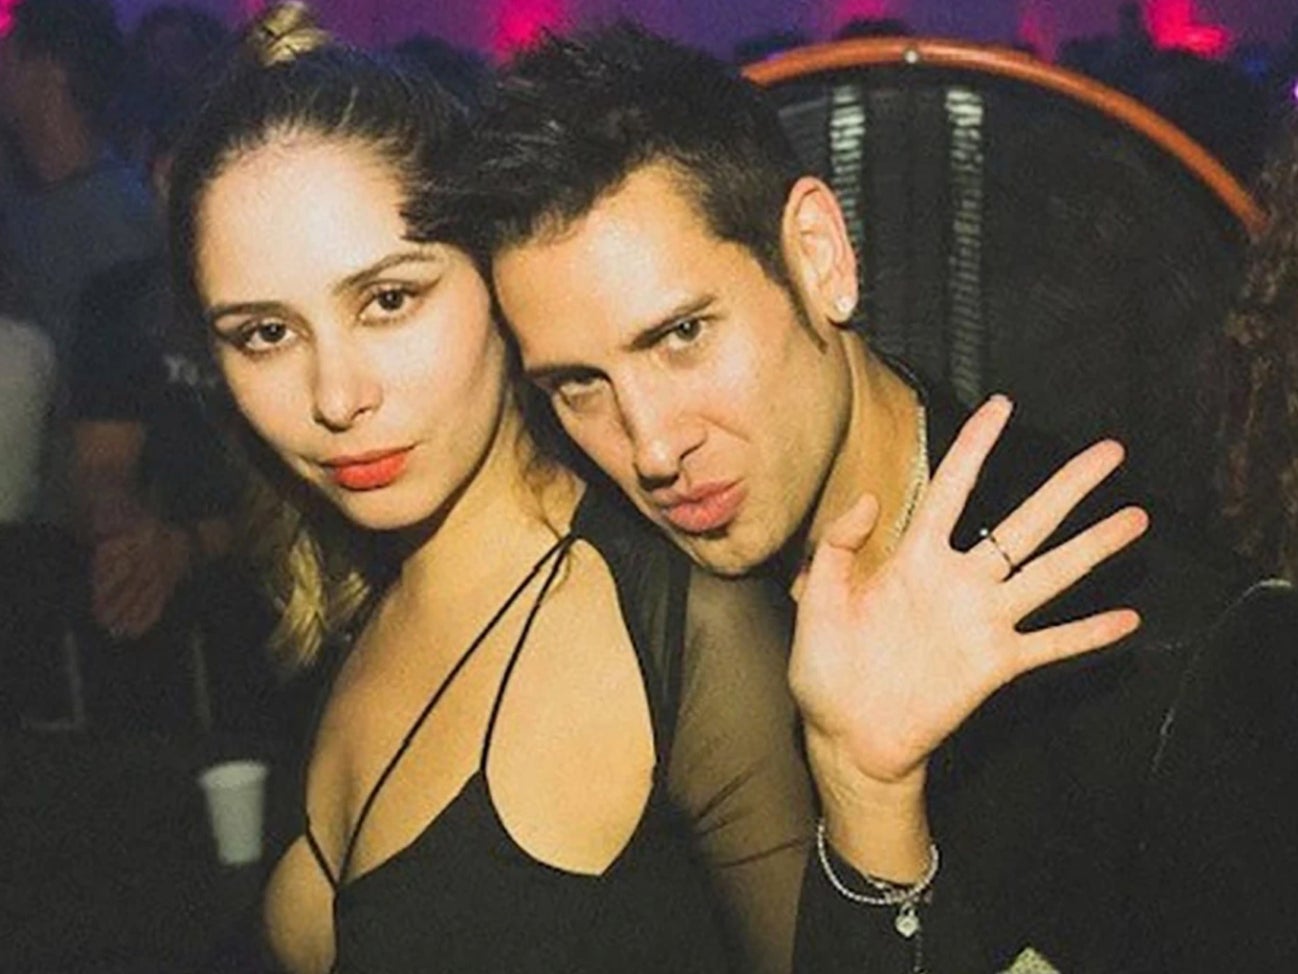 Hilda Marcela Cabrales-Arzola, 26, poses with David Pearce at an after-hours warehouse party in downtown LA on 13 November 2021